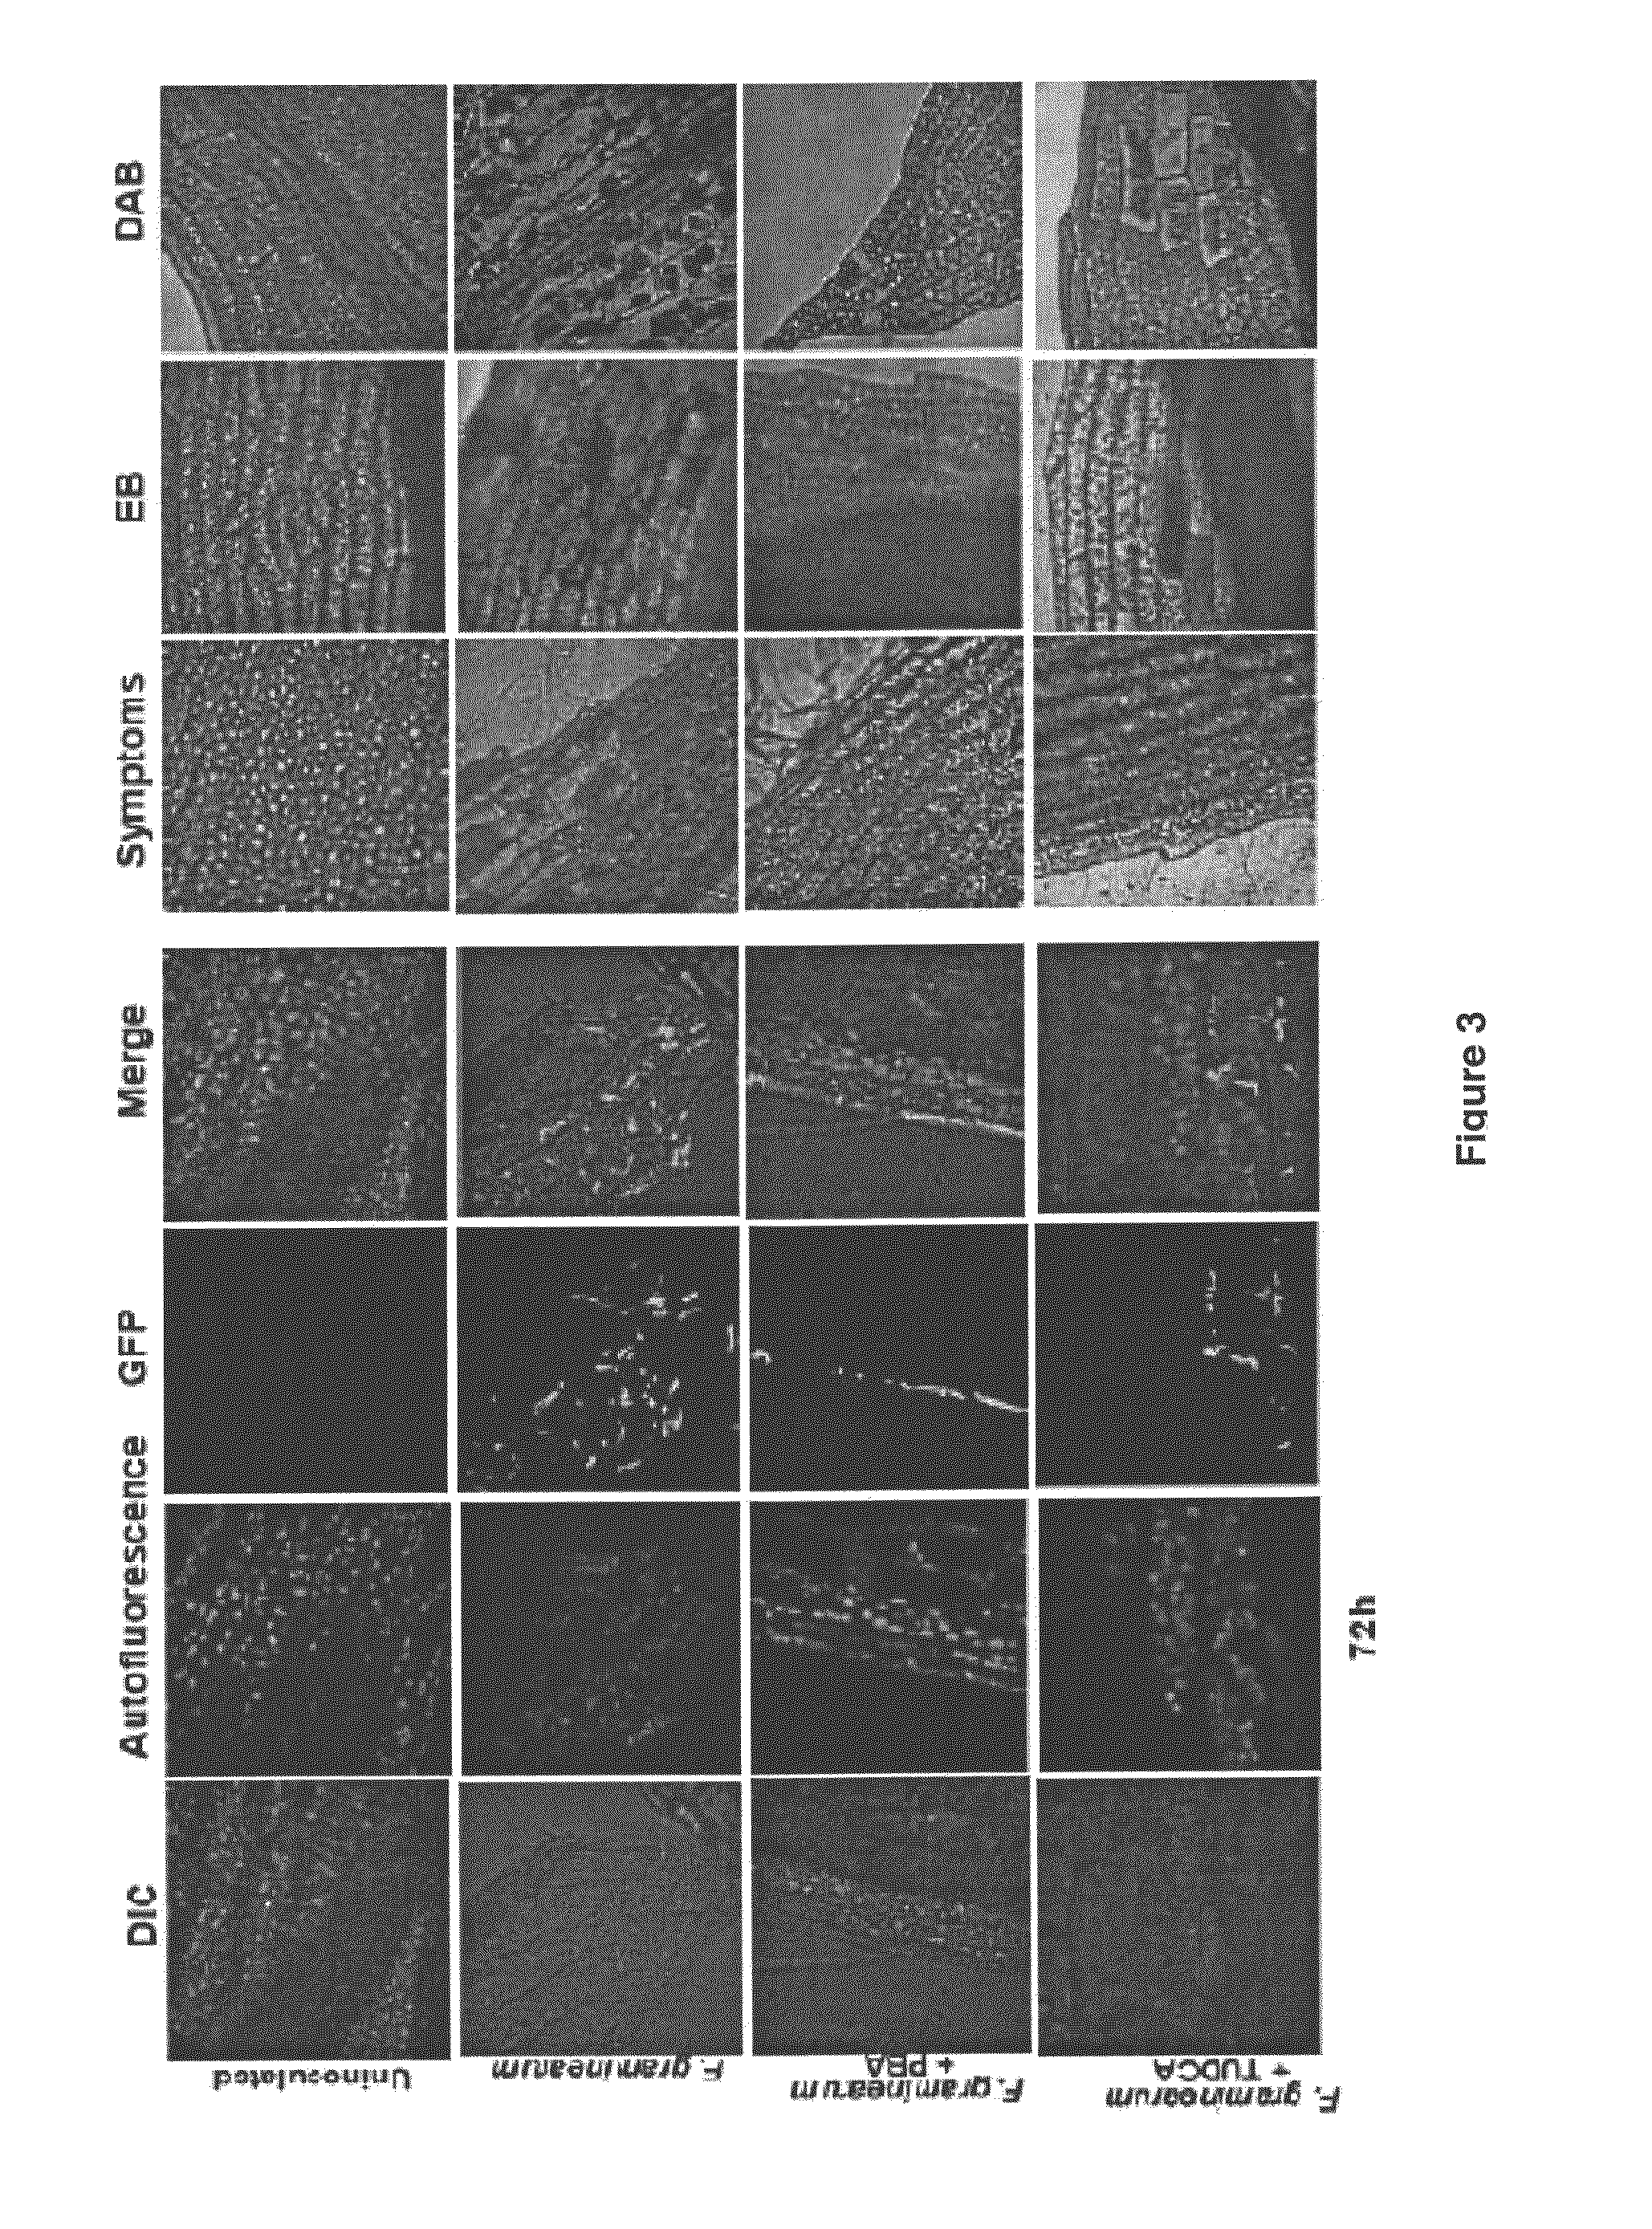 Chemical chaperones and methods of use thereof for inhibiting proliferation of the phytopathogenic fungus Fusarium ssp.